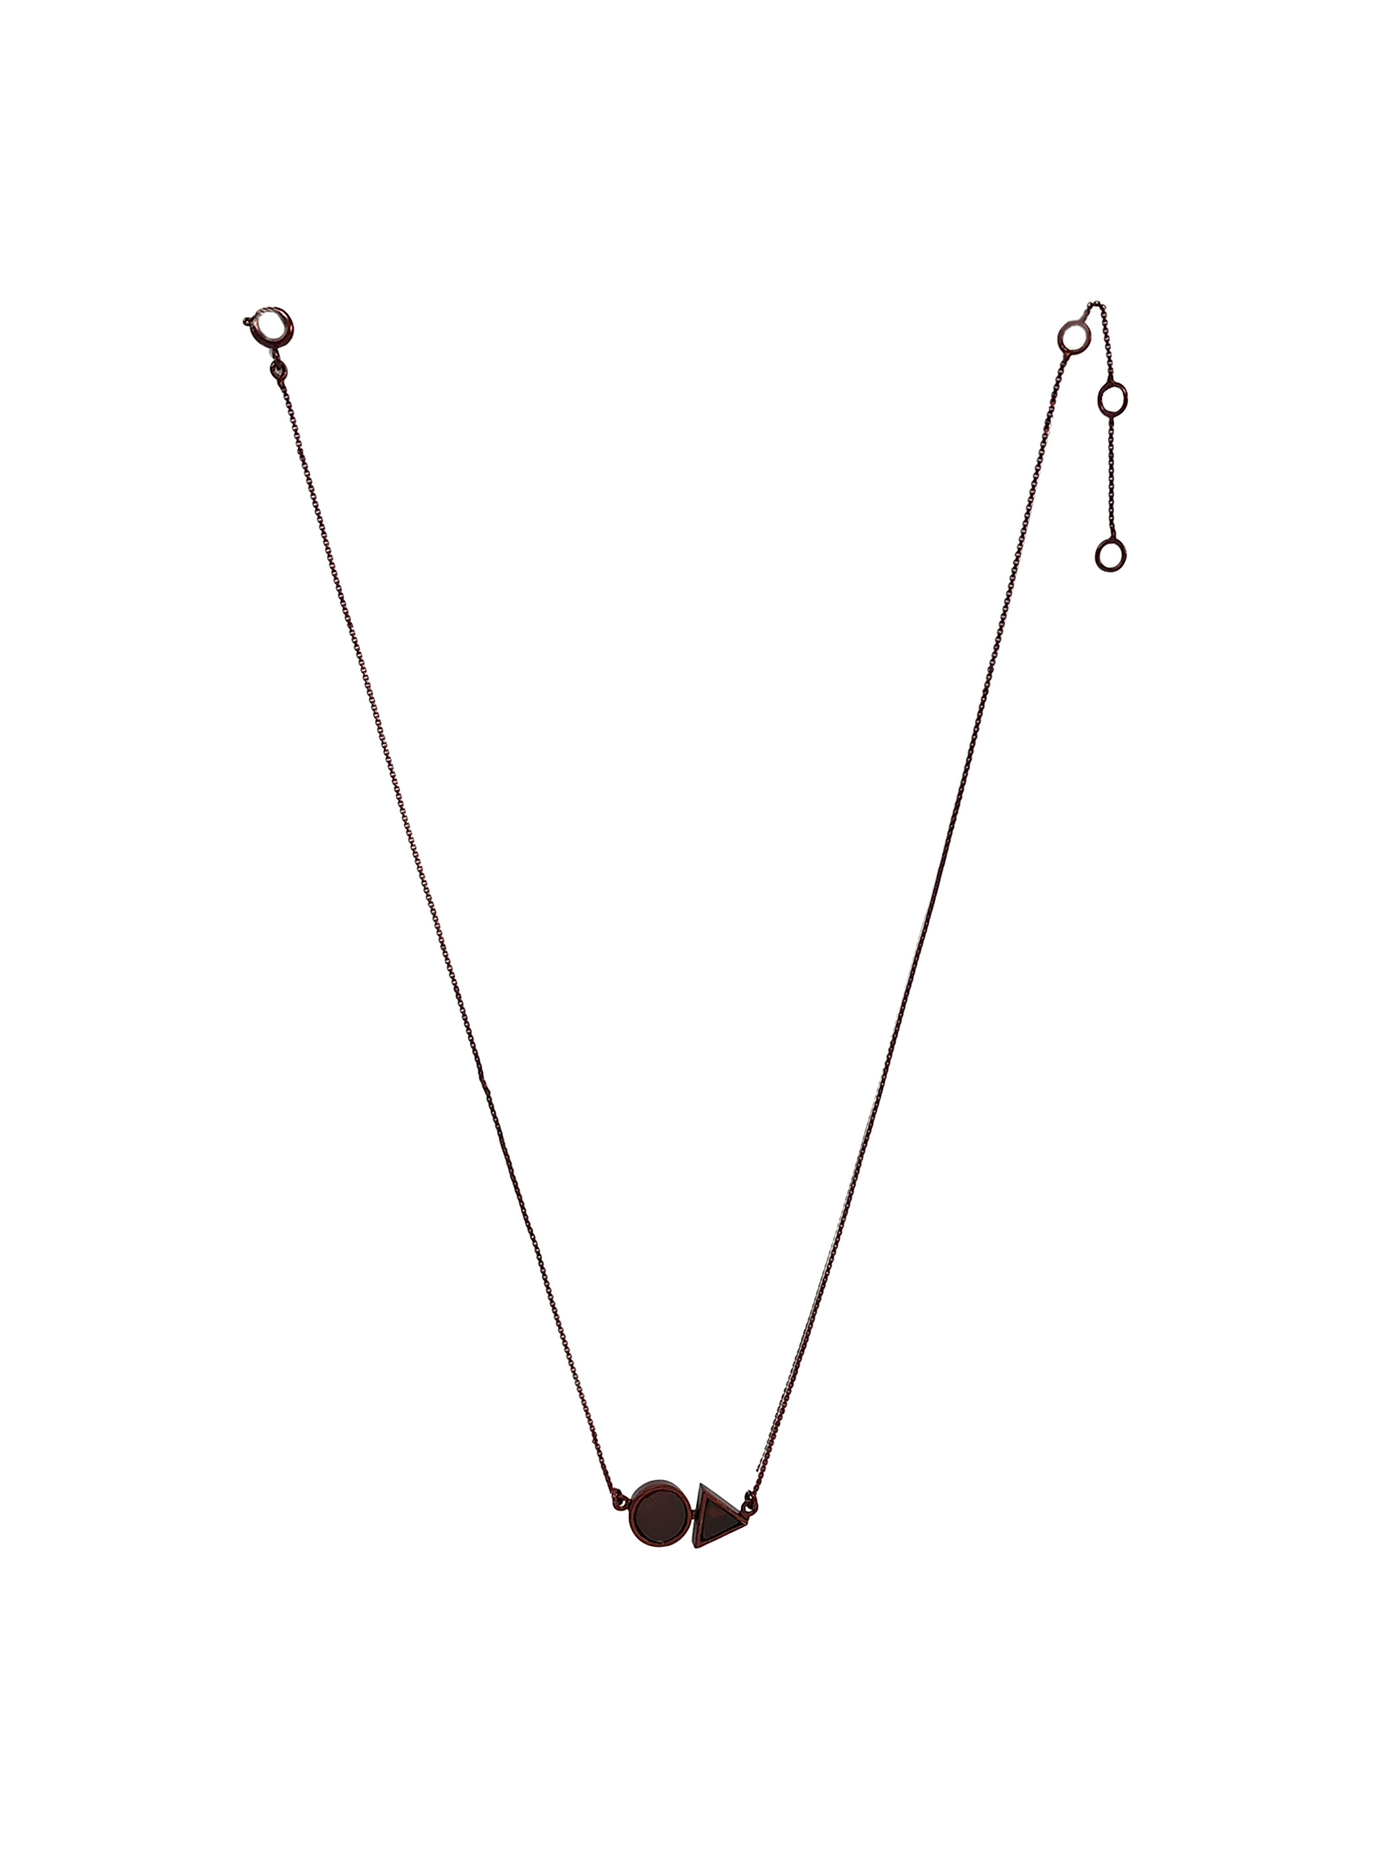 deep red pendant consists of a triangle and a circle placed on a 16 inch adjustable chain.